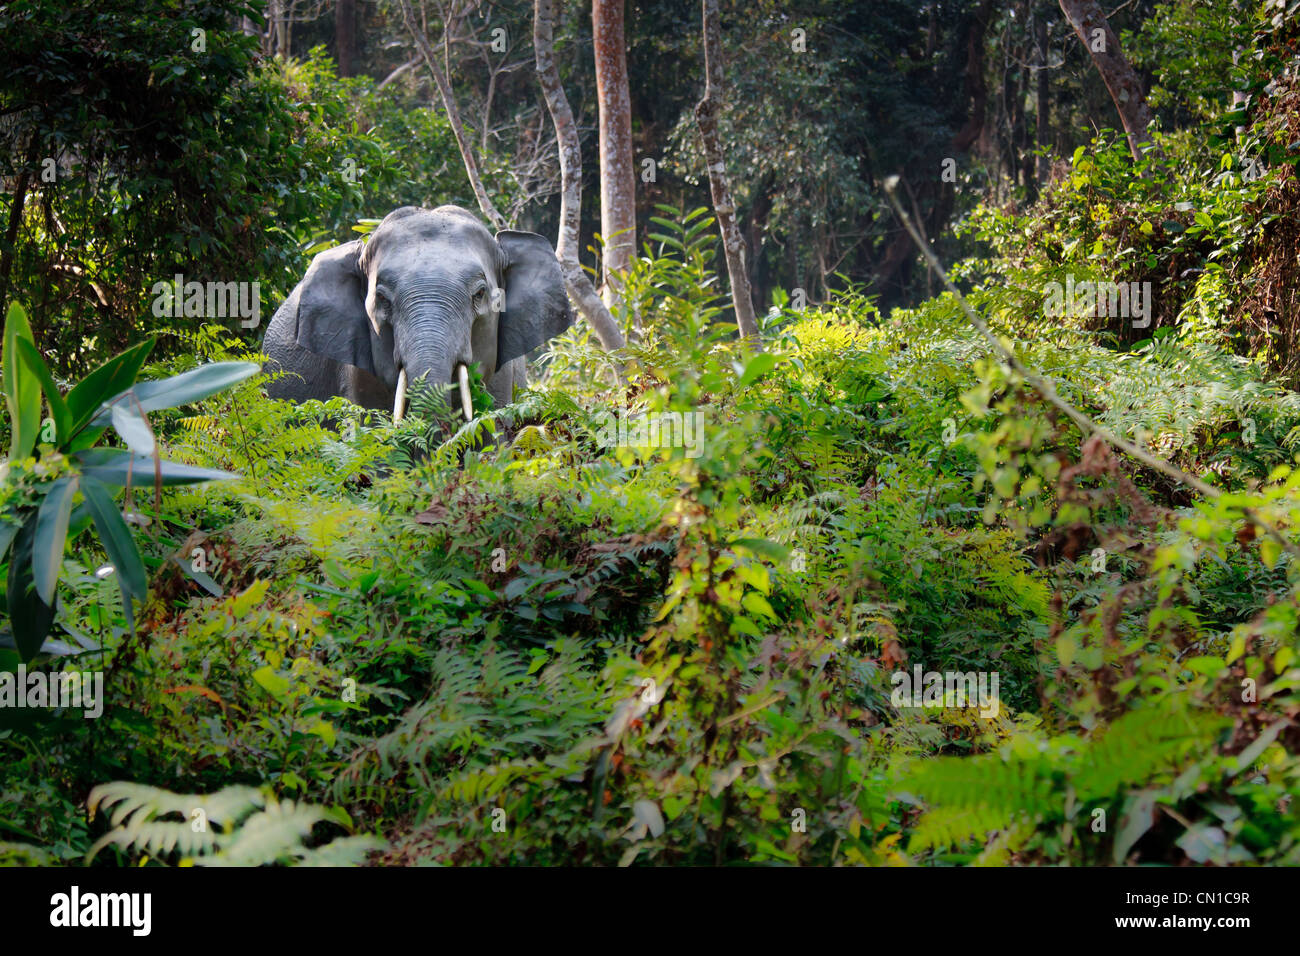 Wild Indian Elephant (Elephas maximus indicus) standing in the forest, Assam, India Stock Photo